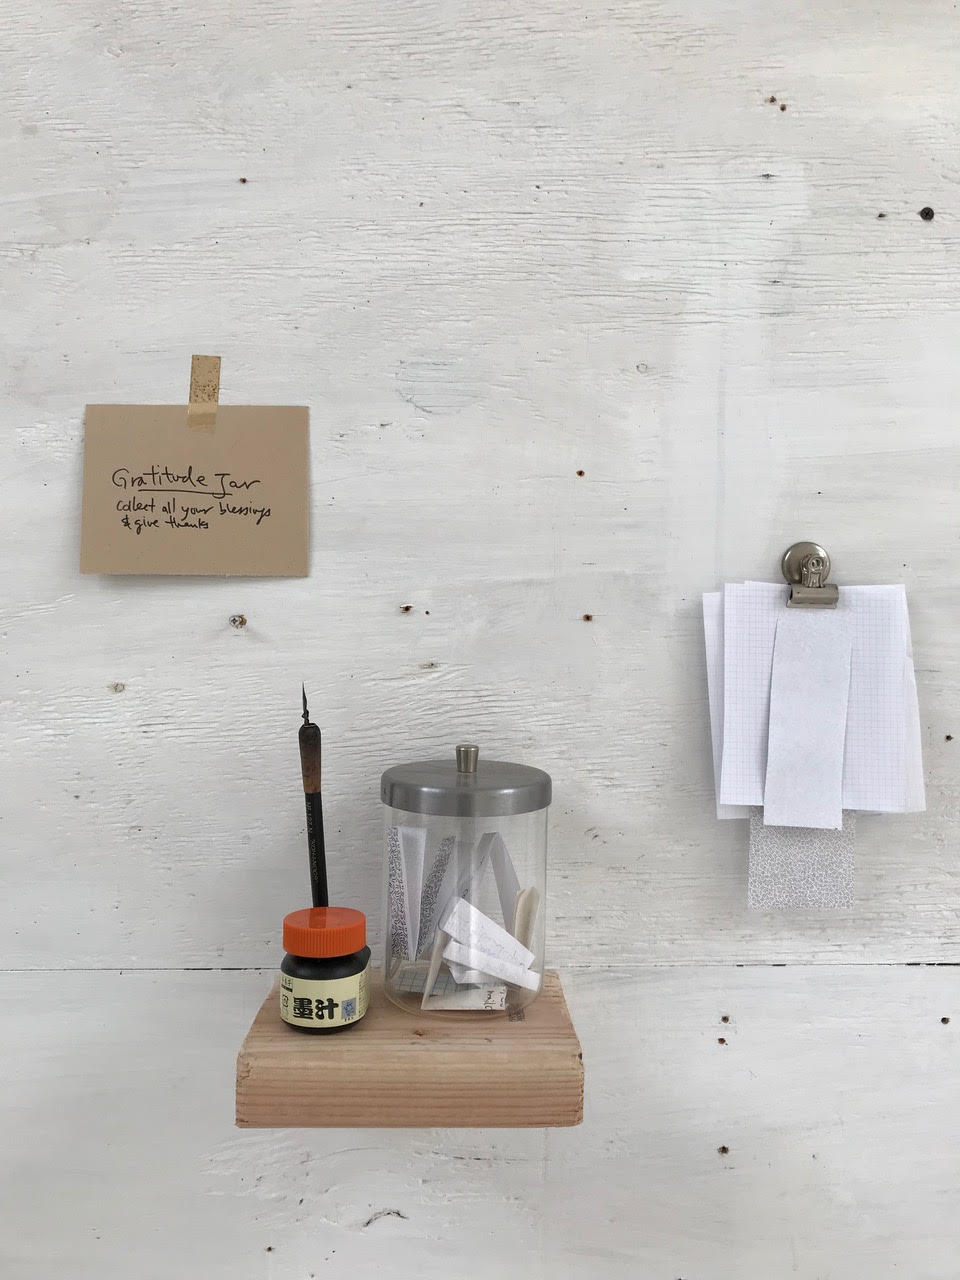 a jar holding messages of gratitude is placed next to paper and ink